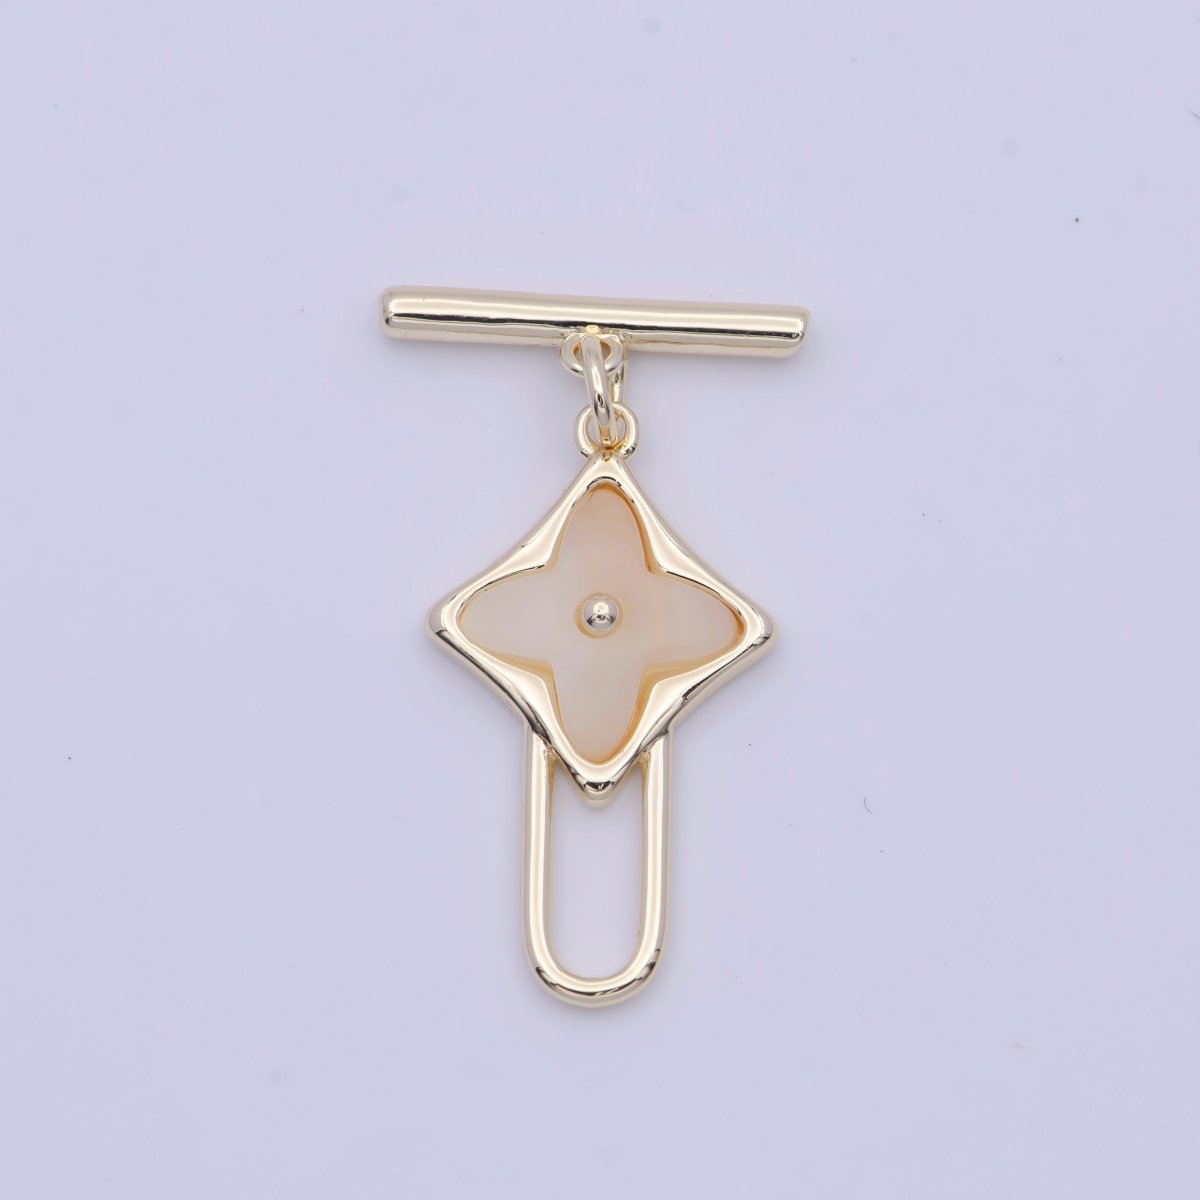 Shell Clover Toggle Clasps Gold Closure Findings Lucky Jewelry Supply L-909 - DLUXCA